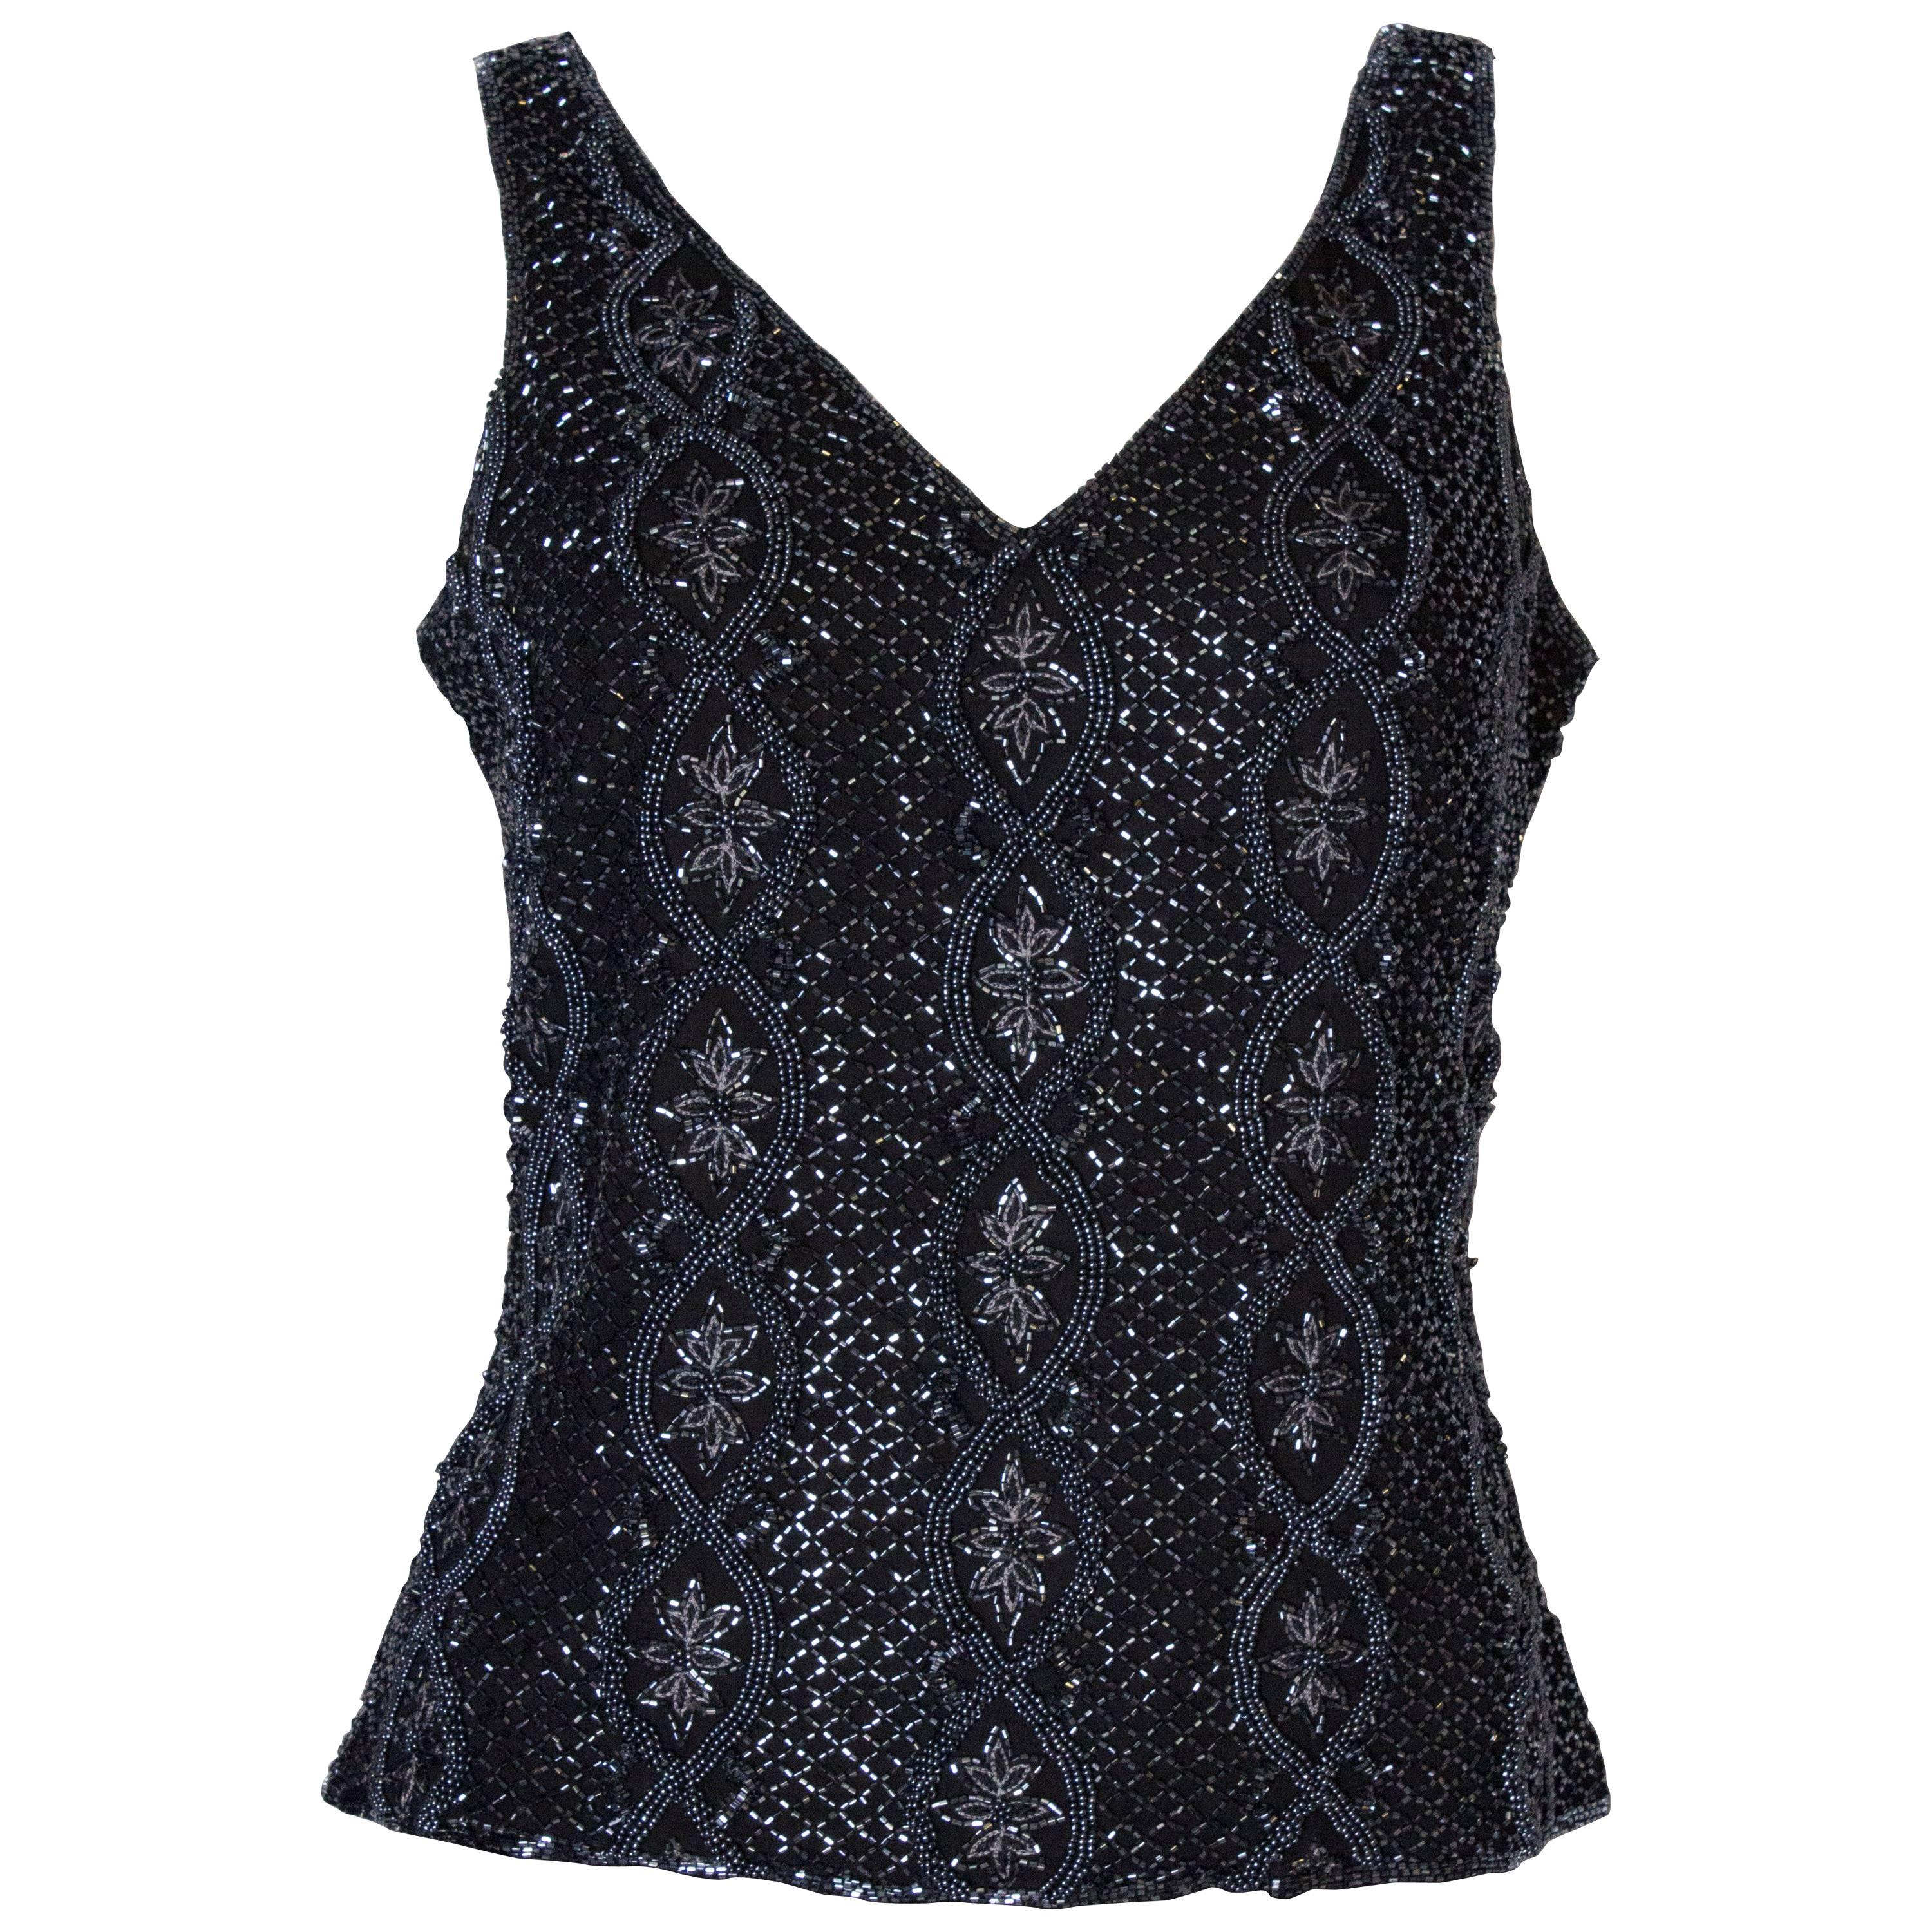 A Vintage 1980s black Beaded Evening Top by Adrianna Papelle For Sale